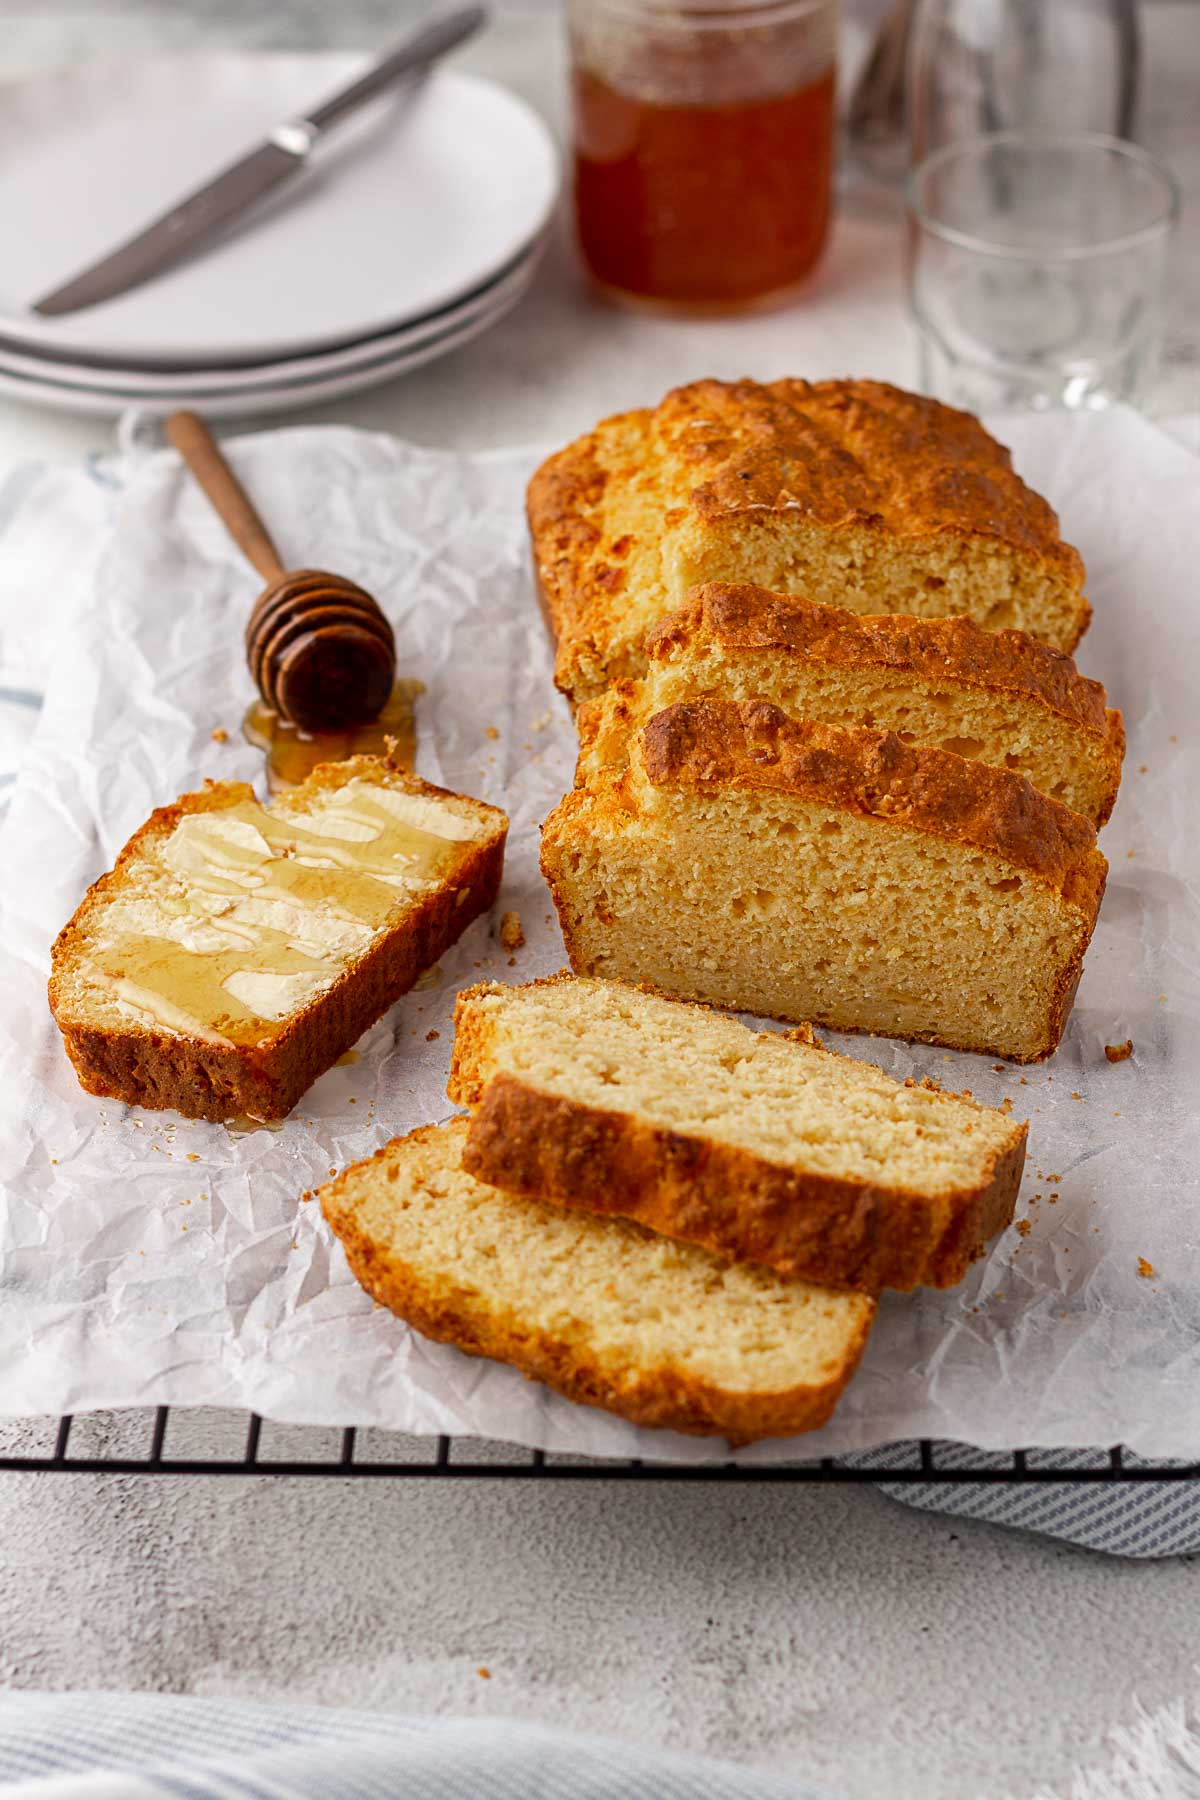 Sliced mealie bread with butter and honey.